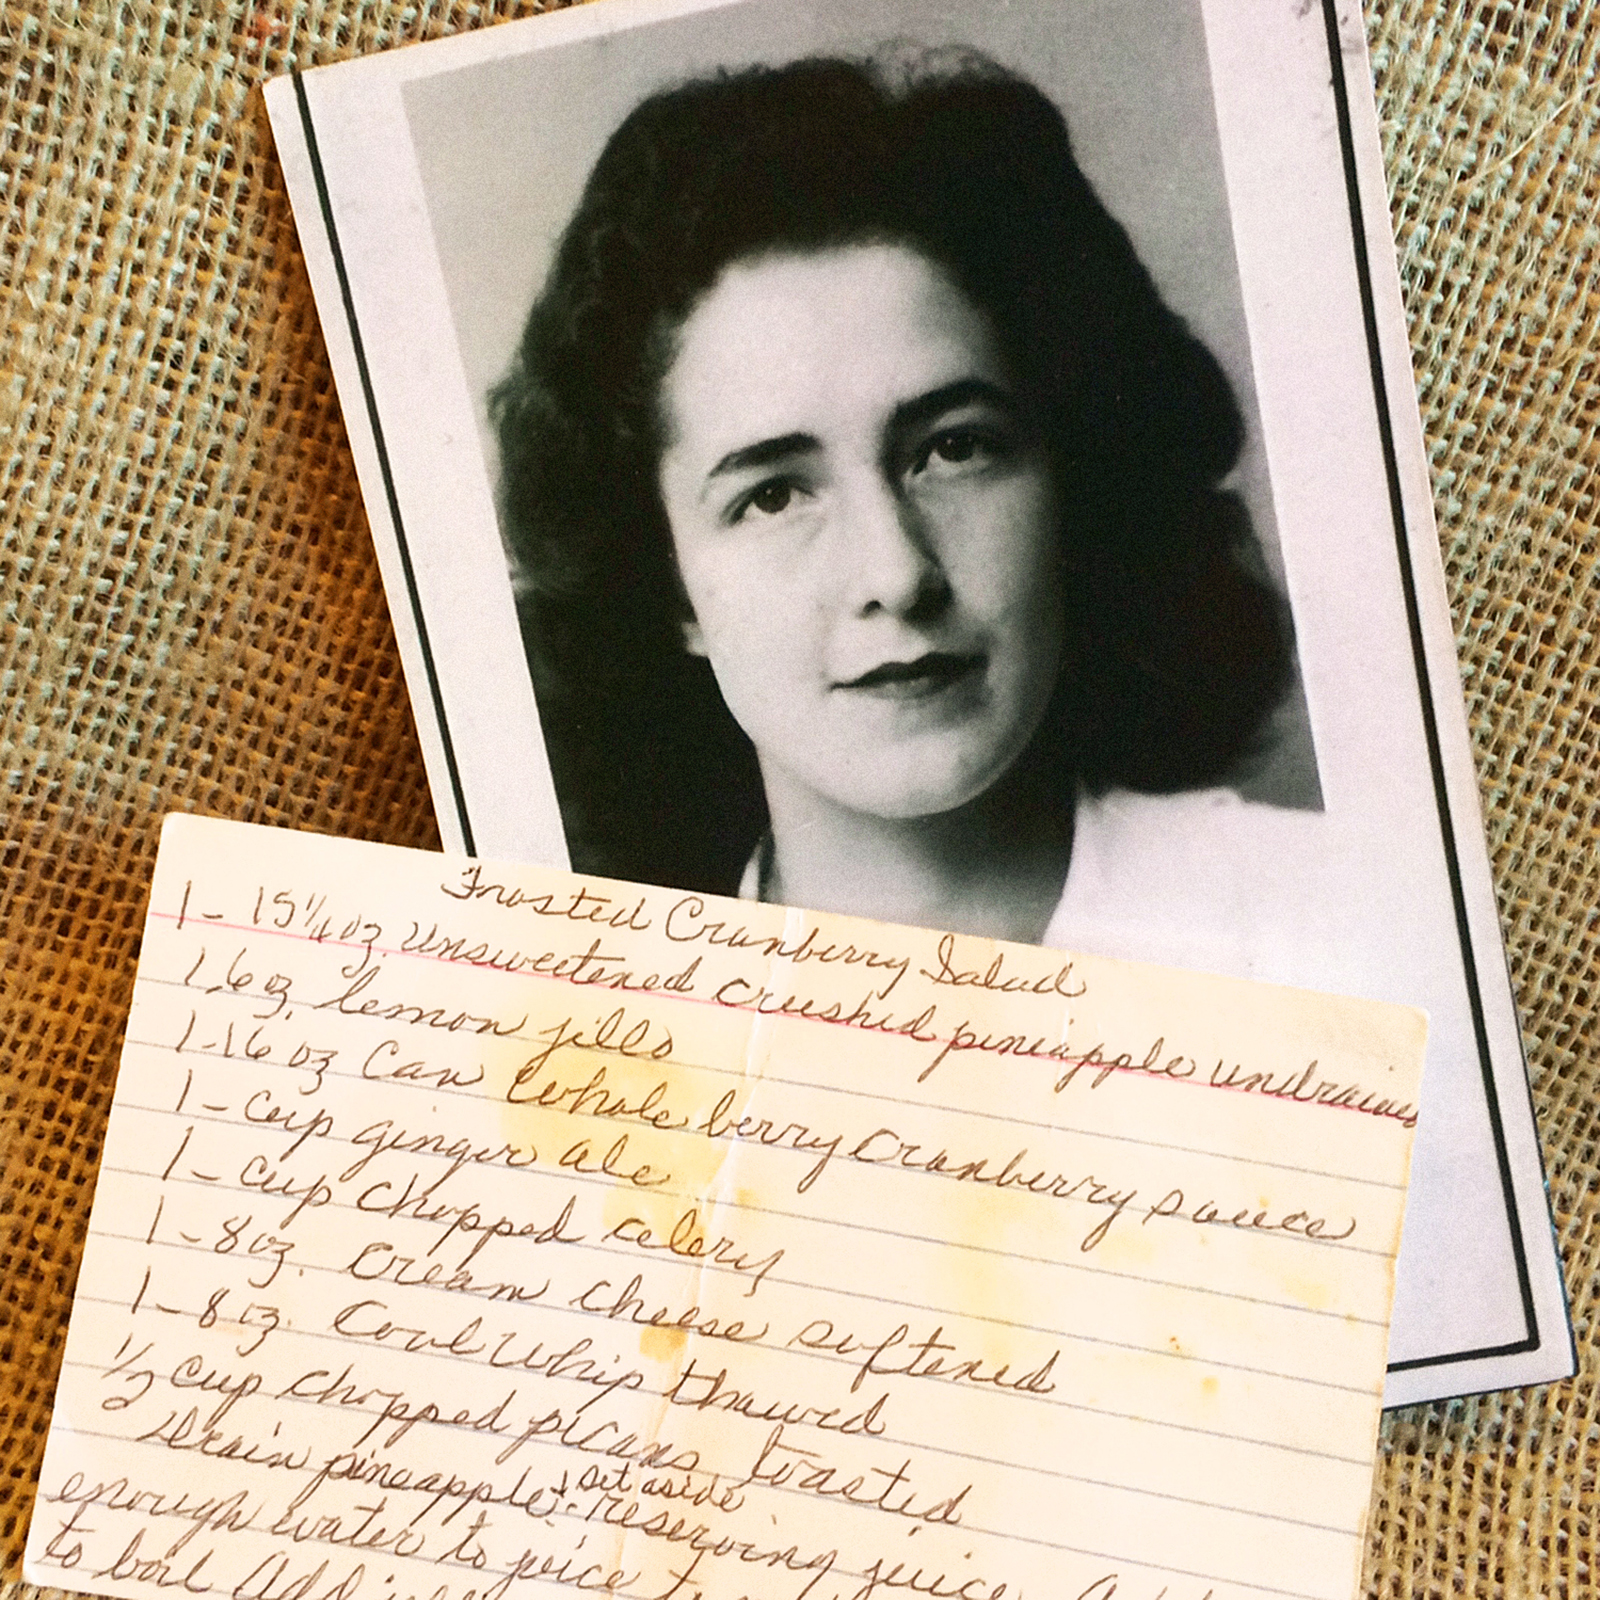 Black and white photograph of Janie Peal and a handwritten recipe for Frosted Cranberry Salad.